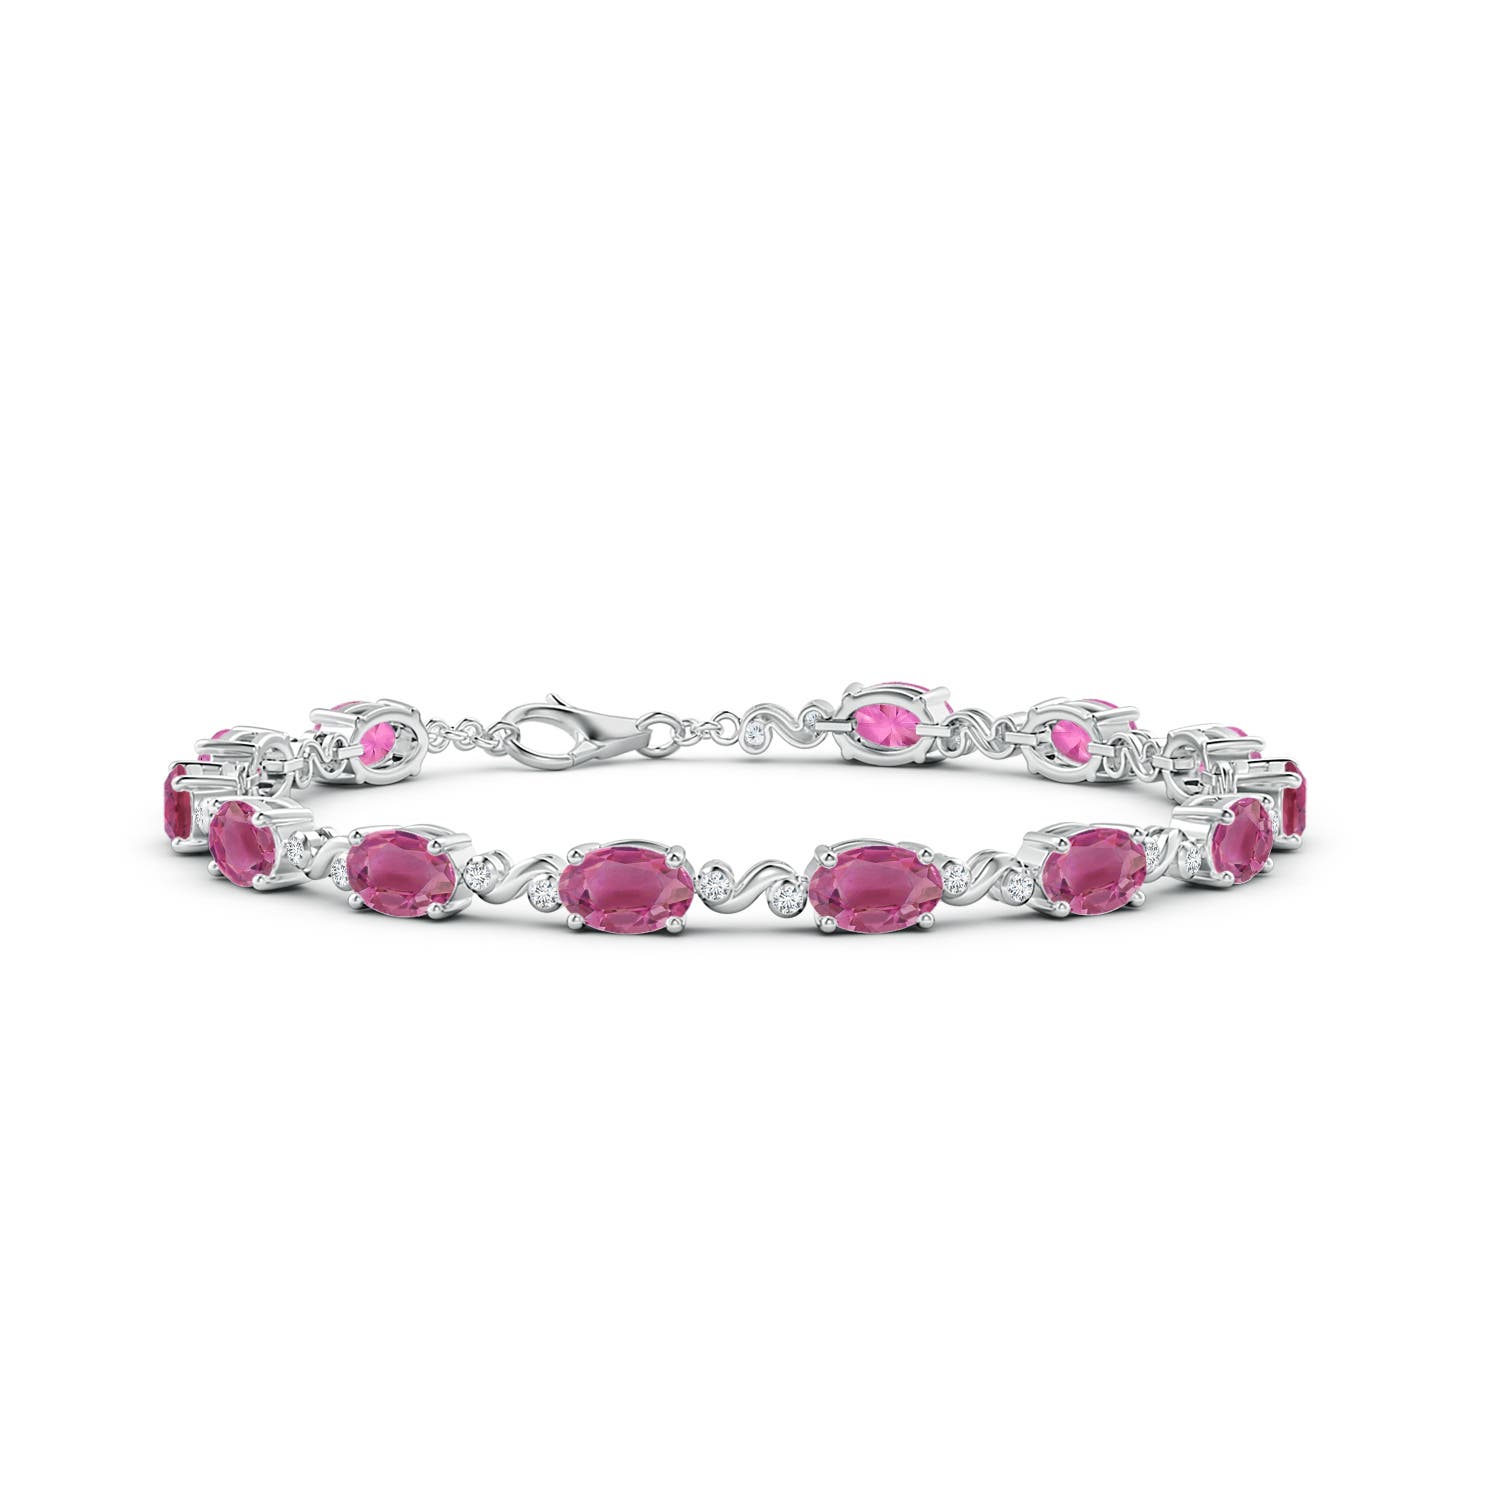 White Cultured Freshwater Pearl with Pink Tourmaline Stainless Steel  Bracelet - DOP055C | JTV.com